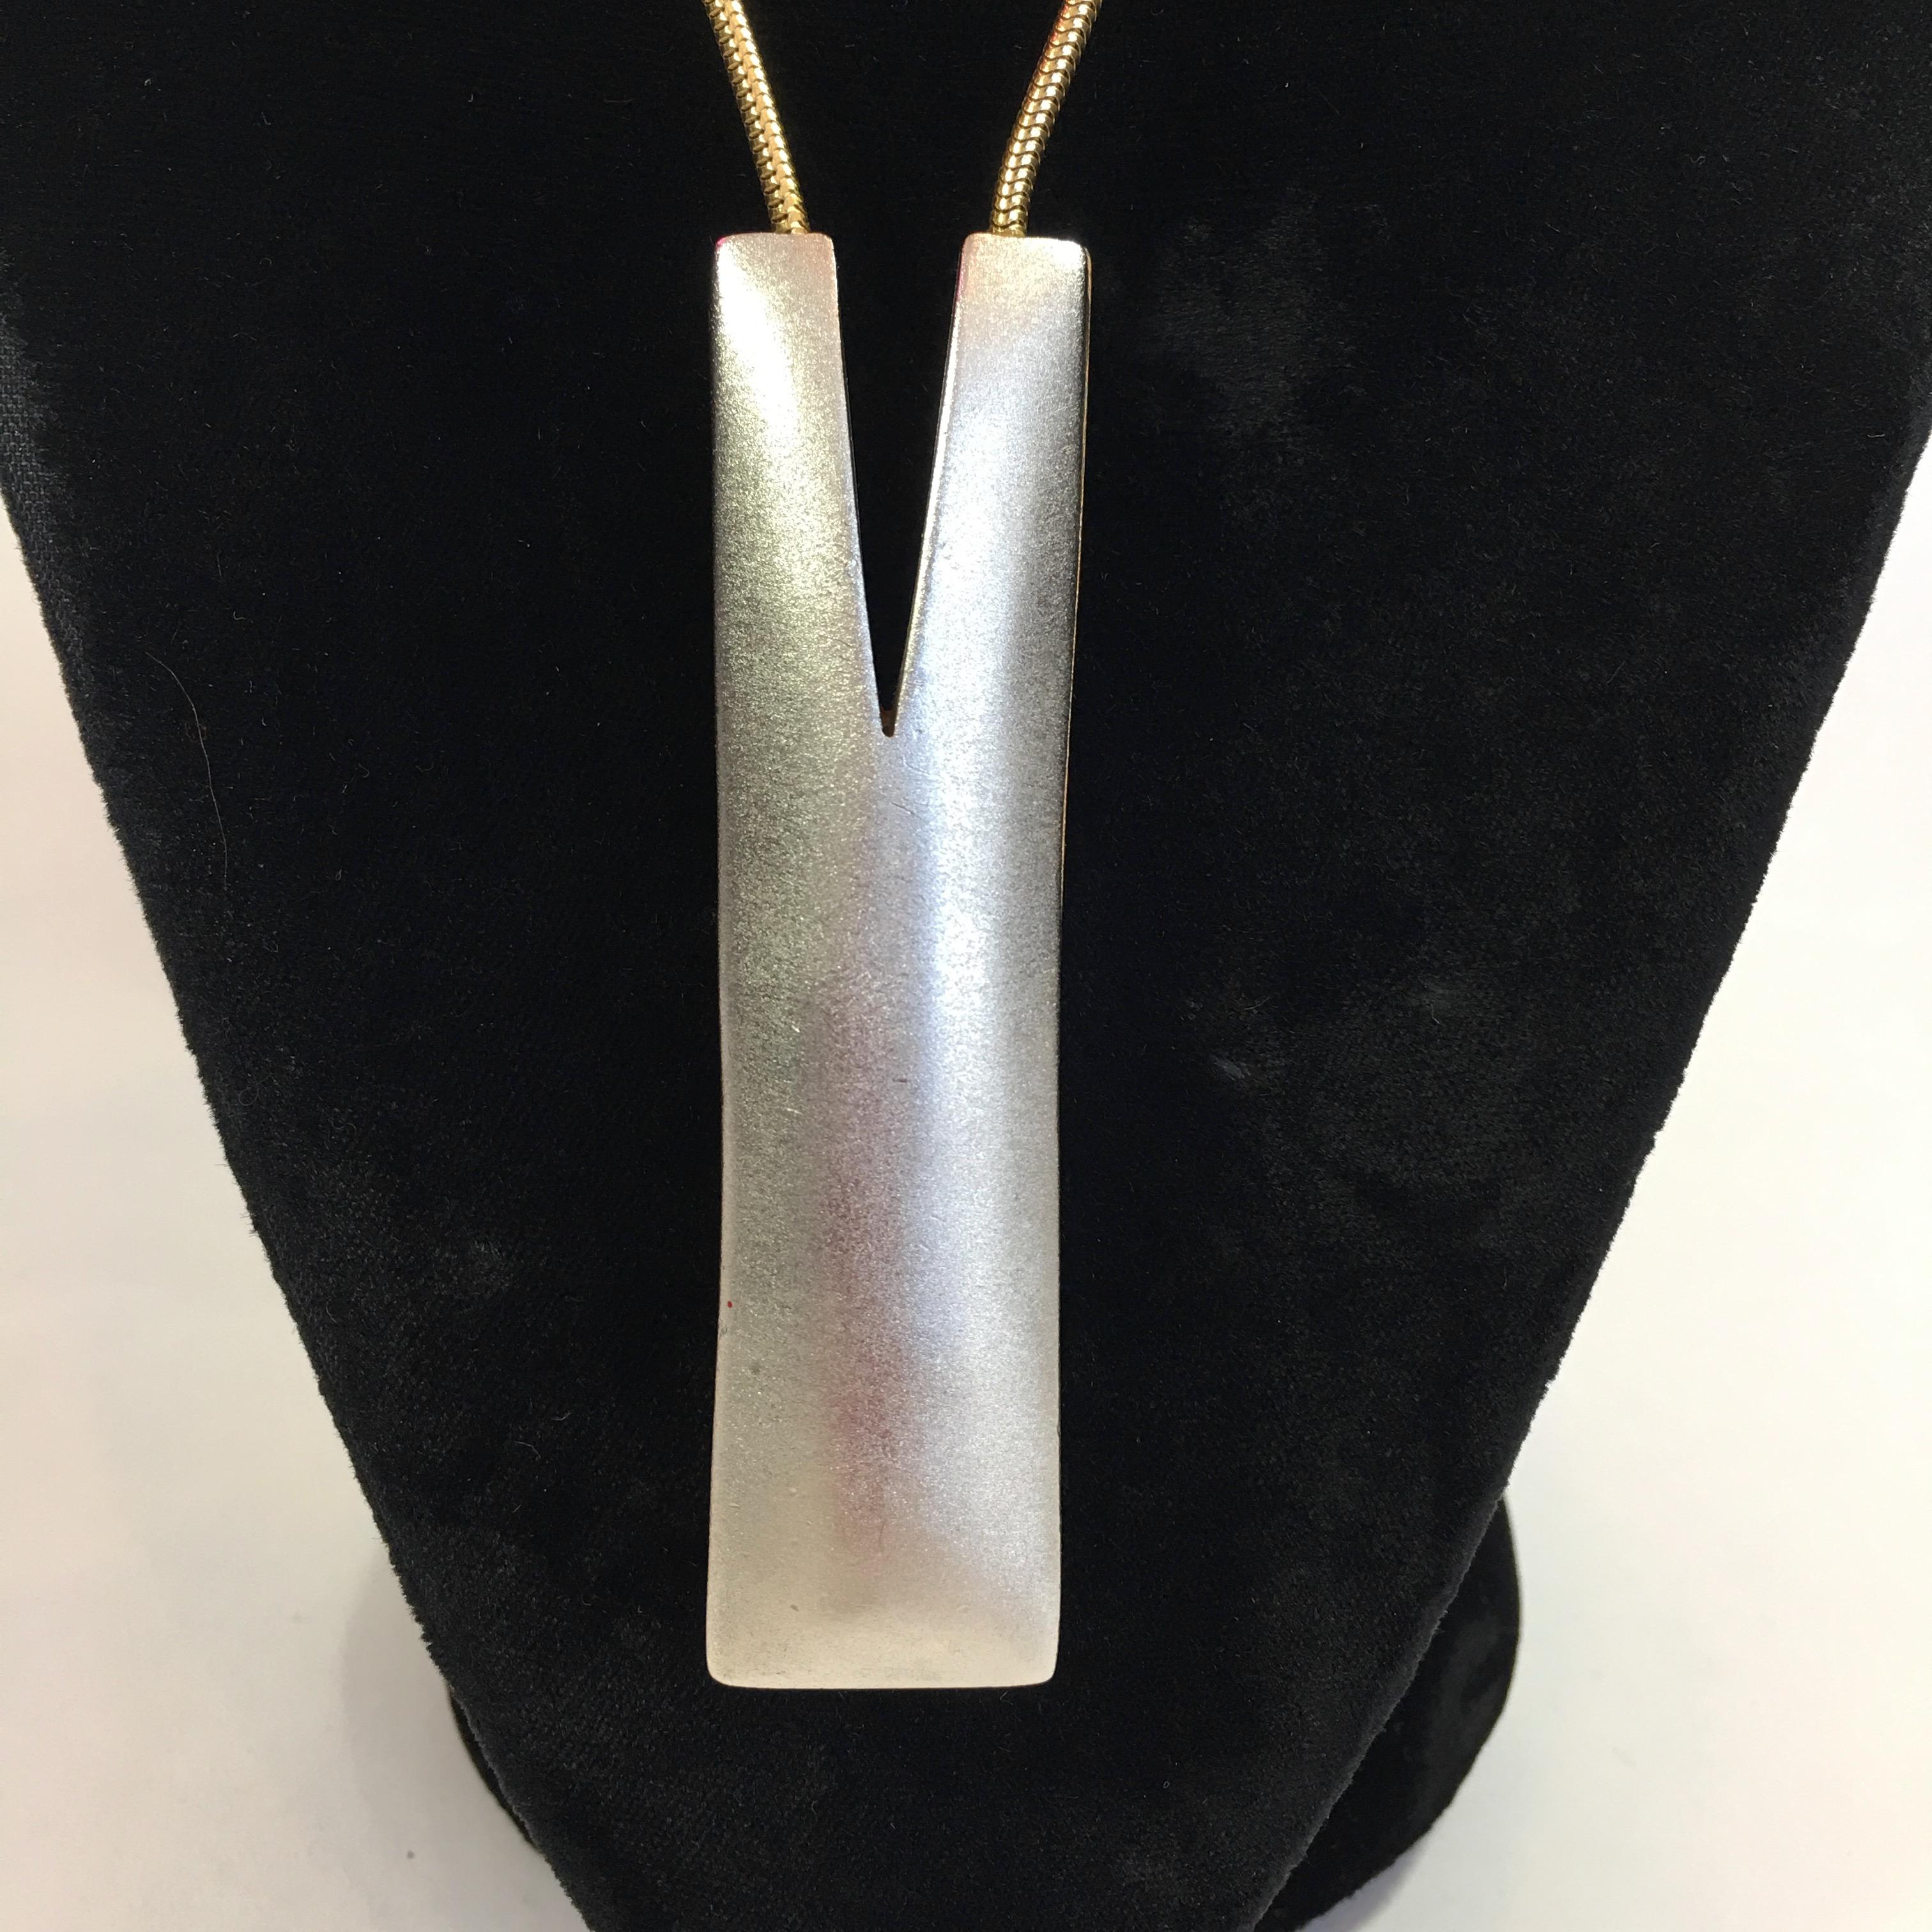 Modernist Reversible Matte Gold/Silver Necklace. 
Long round snake chain. Pendant in a modern M shape. Necklace has no logo markings on it. 
Item is in very good vintage condition.

Measurements is as follows:
Pendant drop (from back neck)-